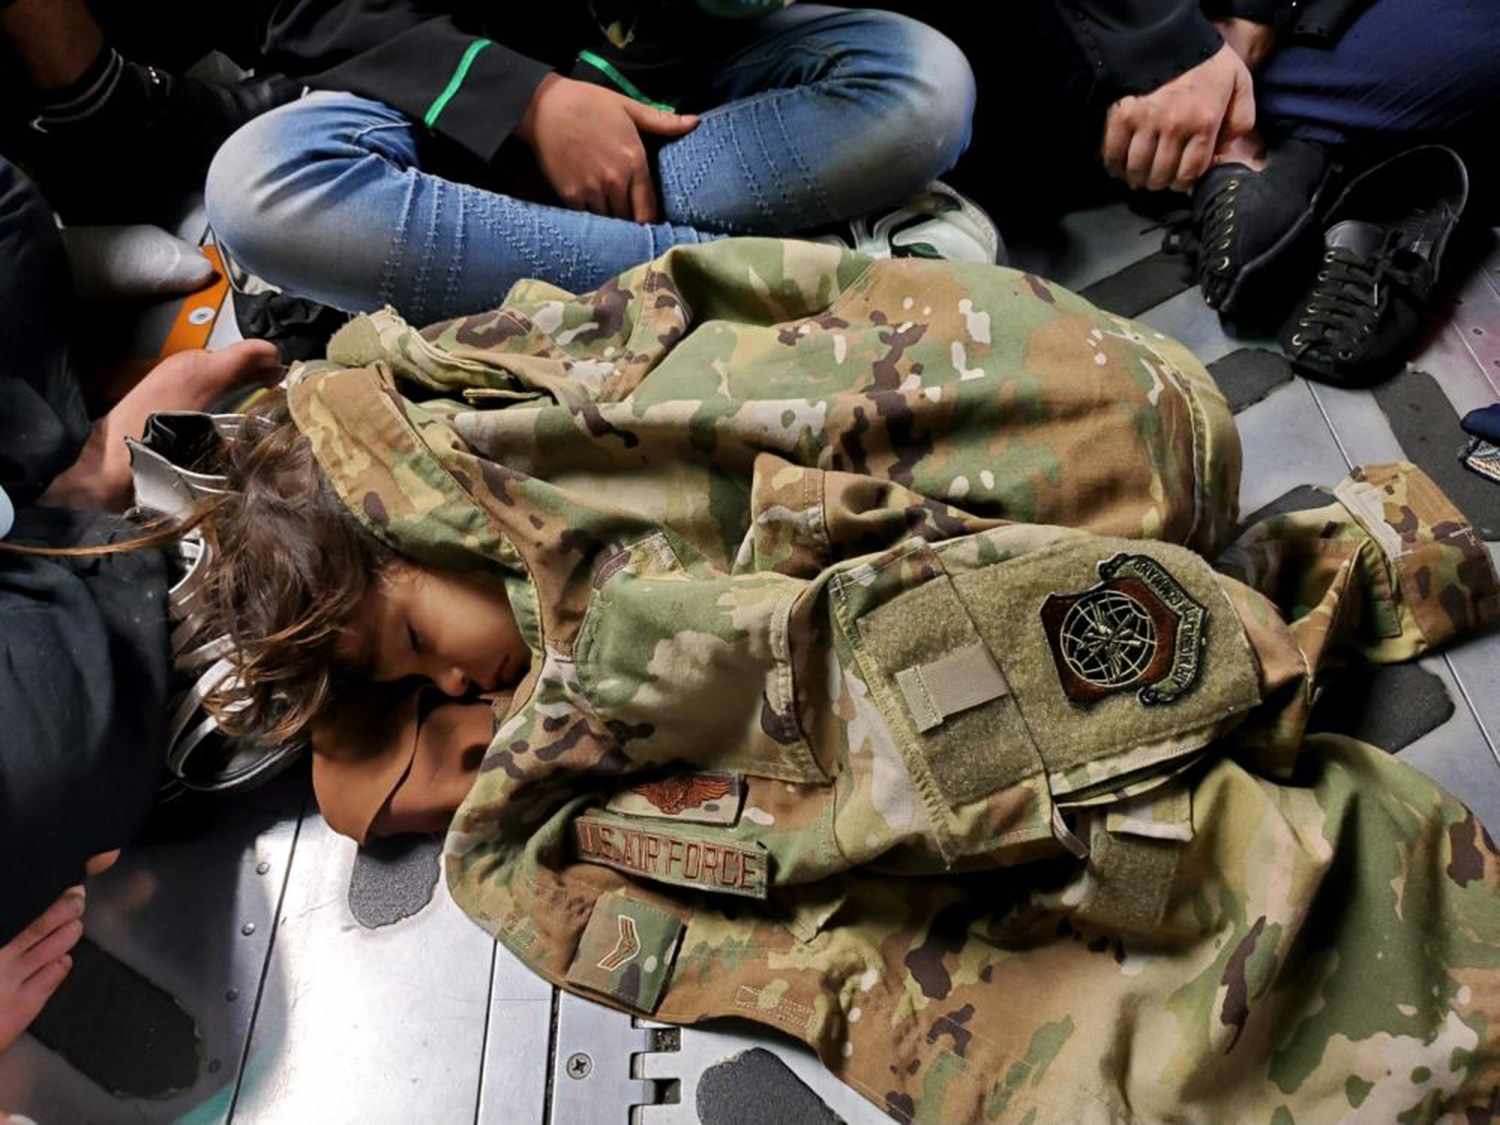 The Story Behind Moving Photo of Child Sleeping on Afghanistan Escape Plane Under Airman's Uniform